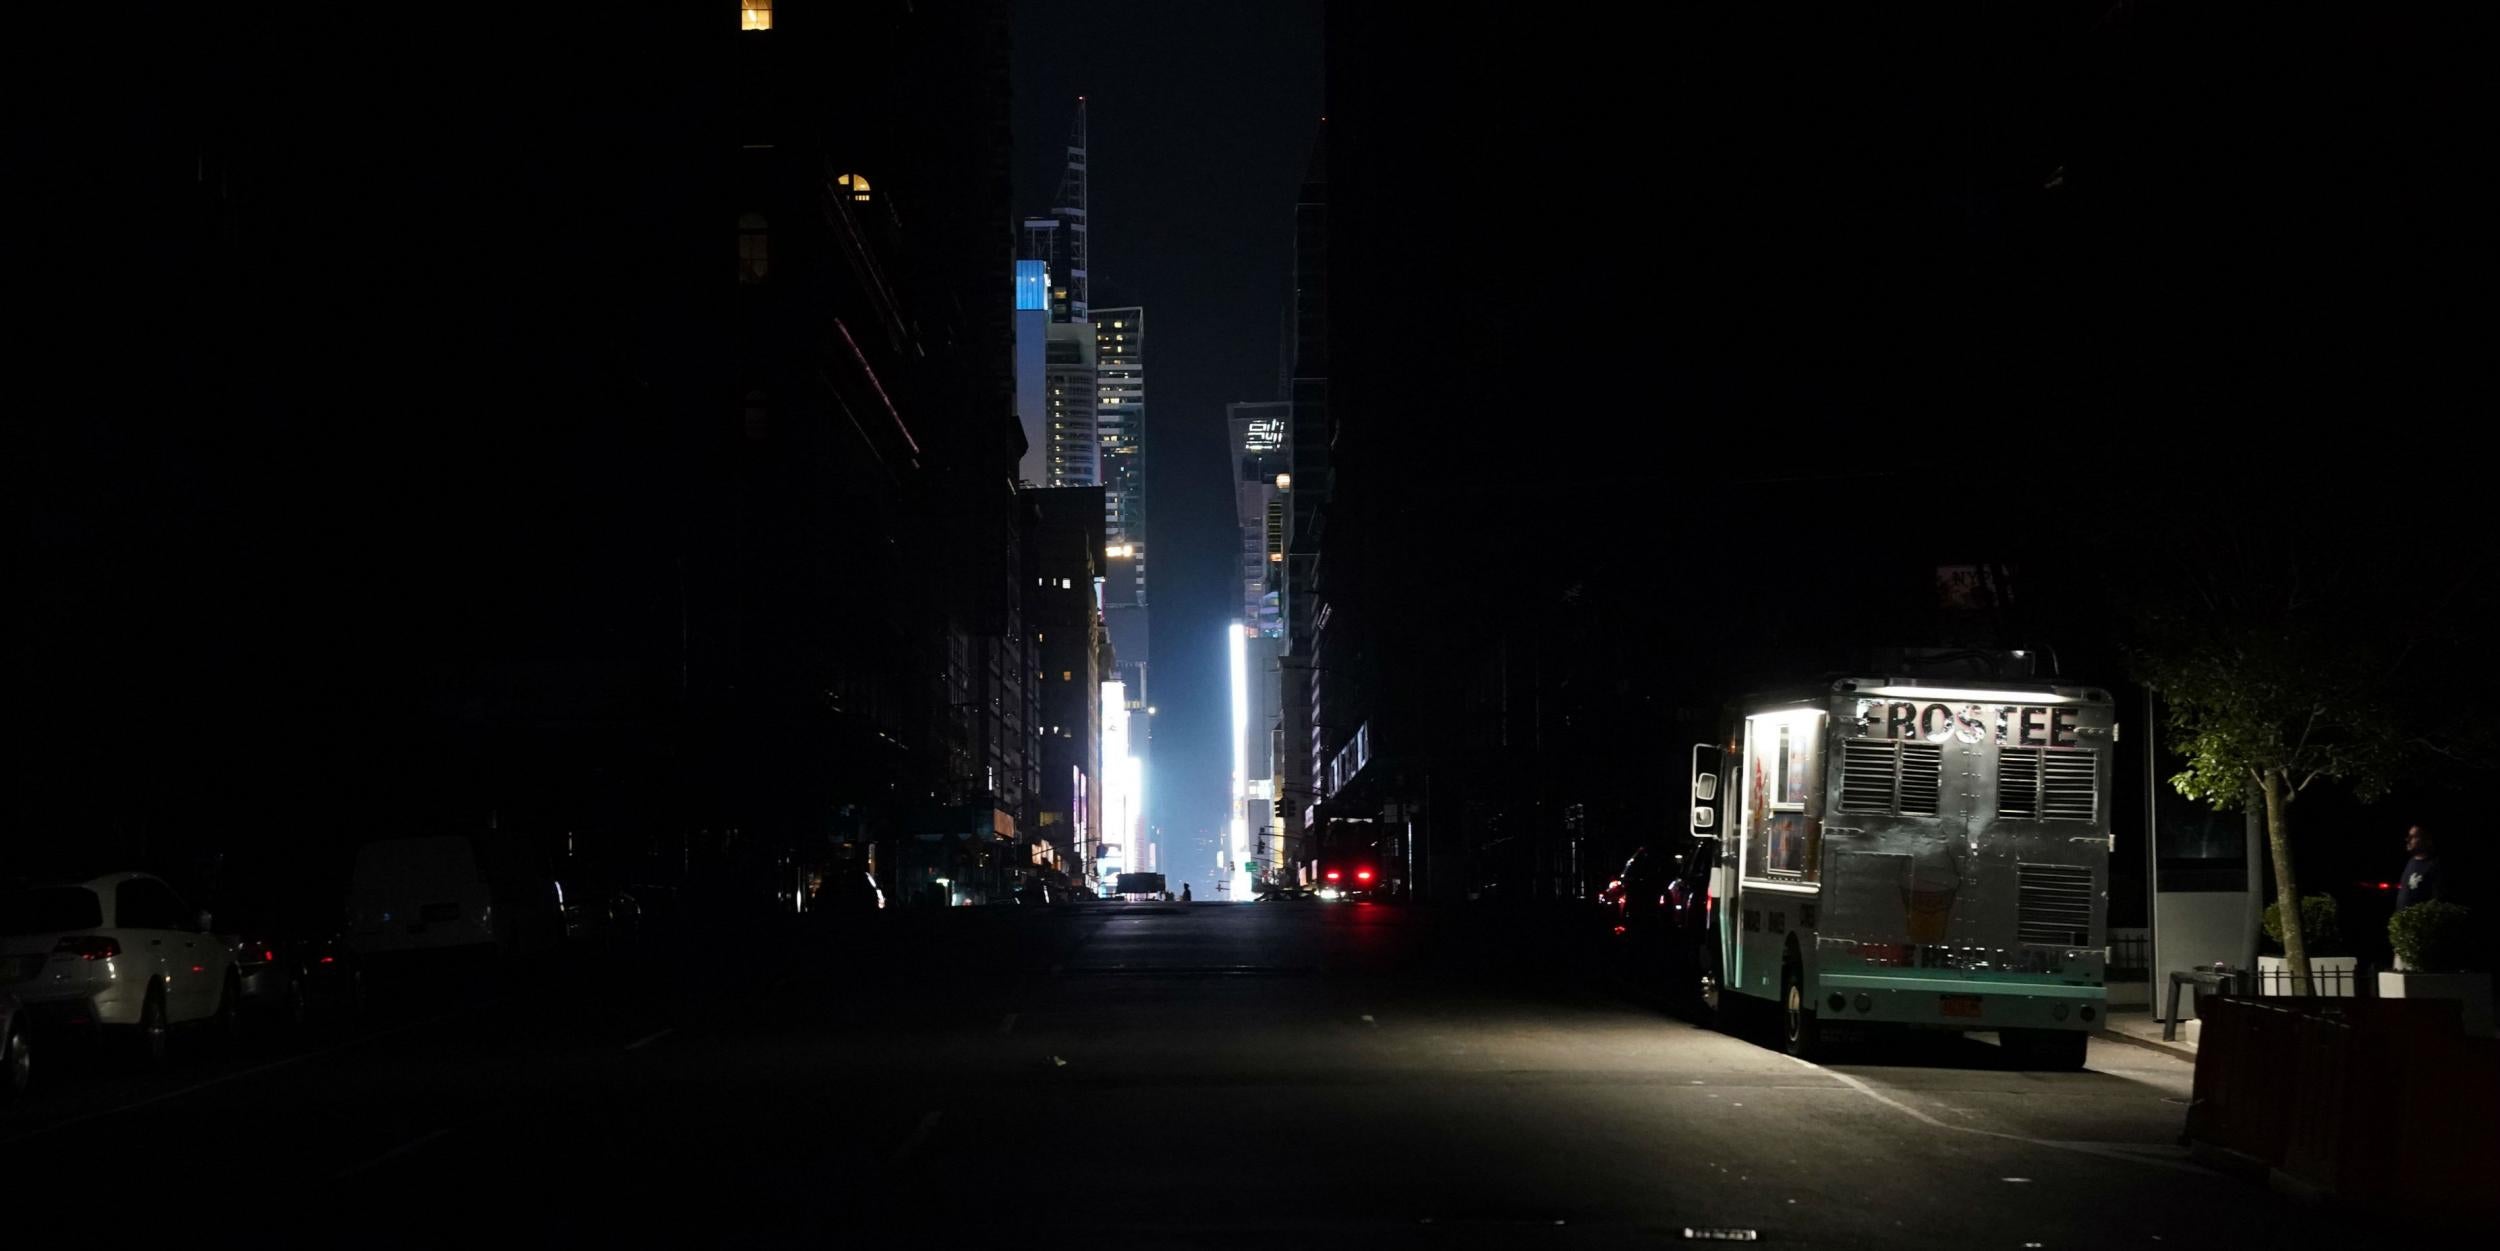 New York City Suffered A Blackout 42 Years To The Day After A Power Outage Caused A Crimewave 7974